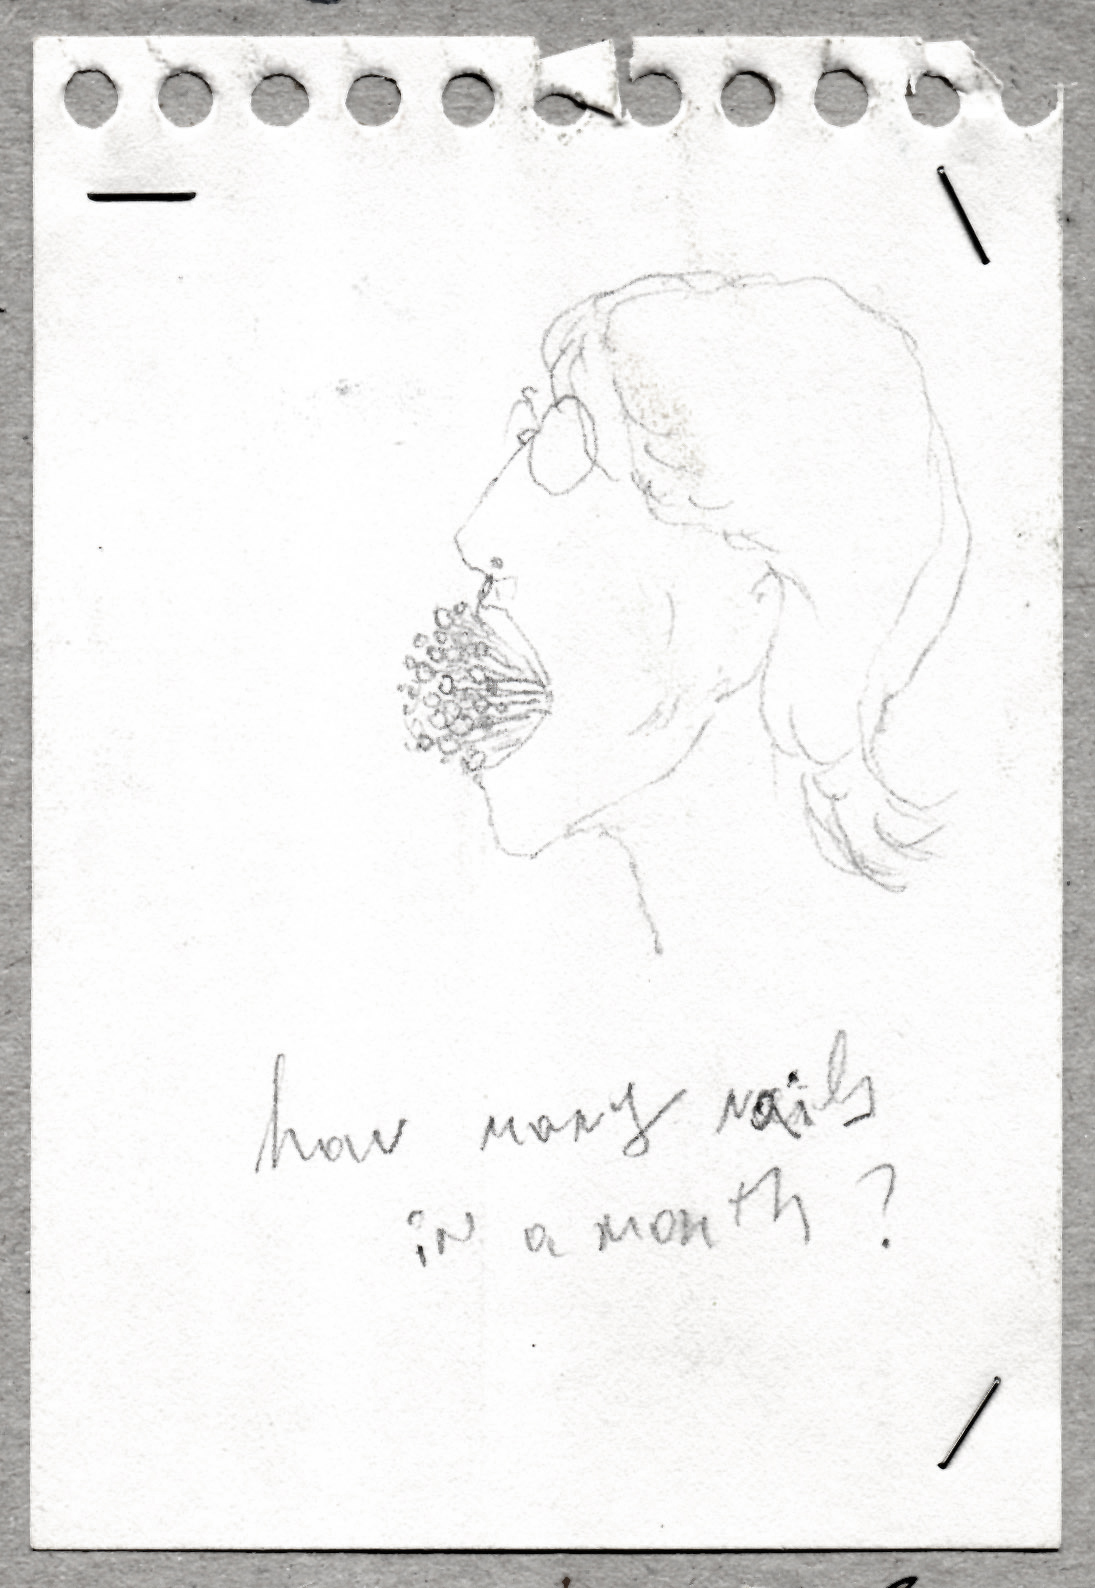 How many nails in a mouth?, 1992